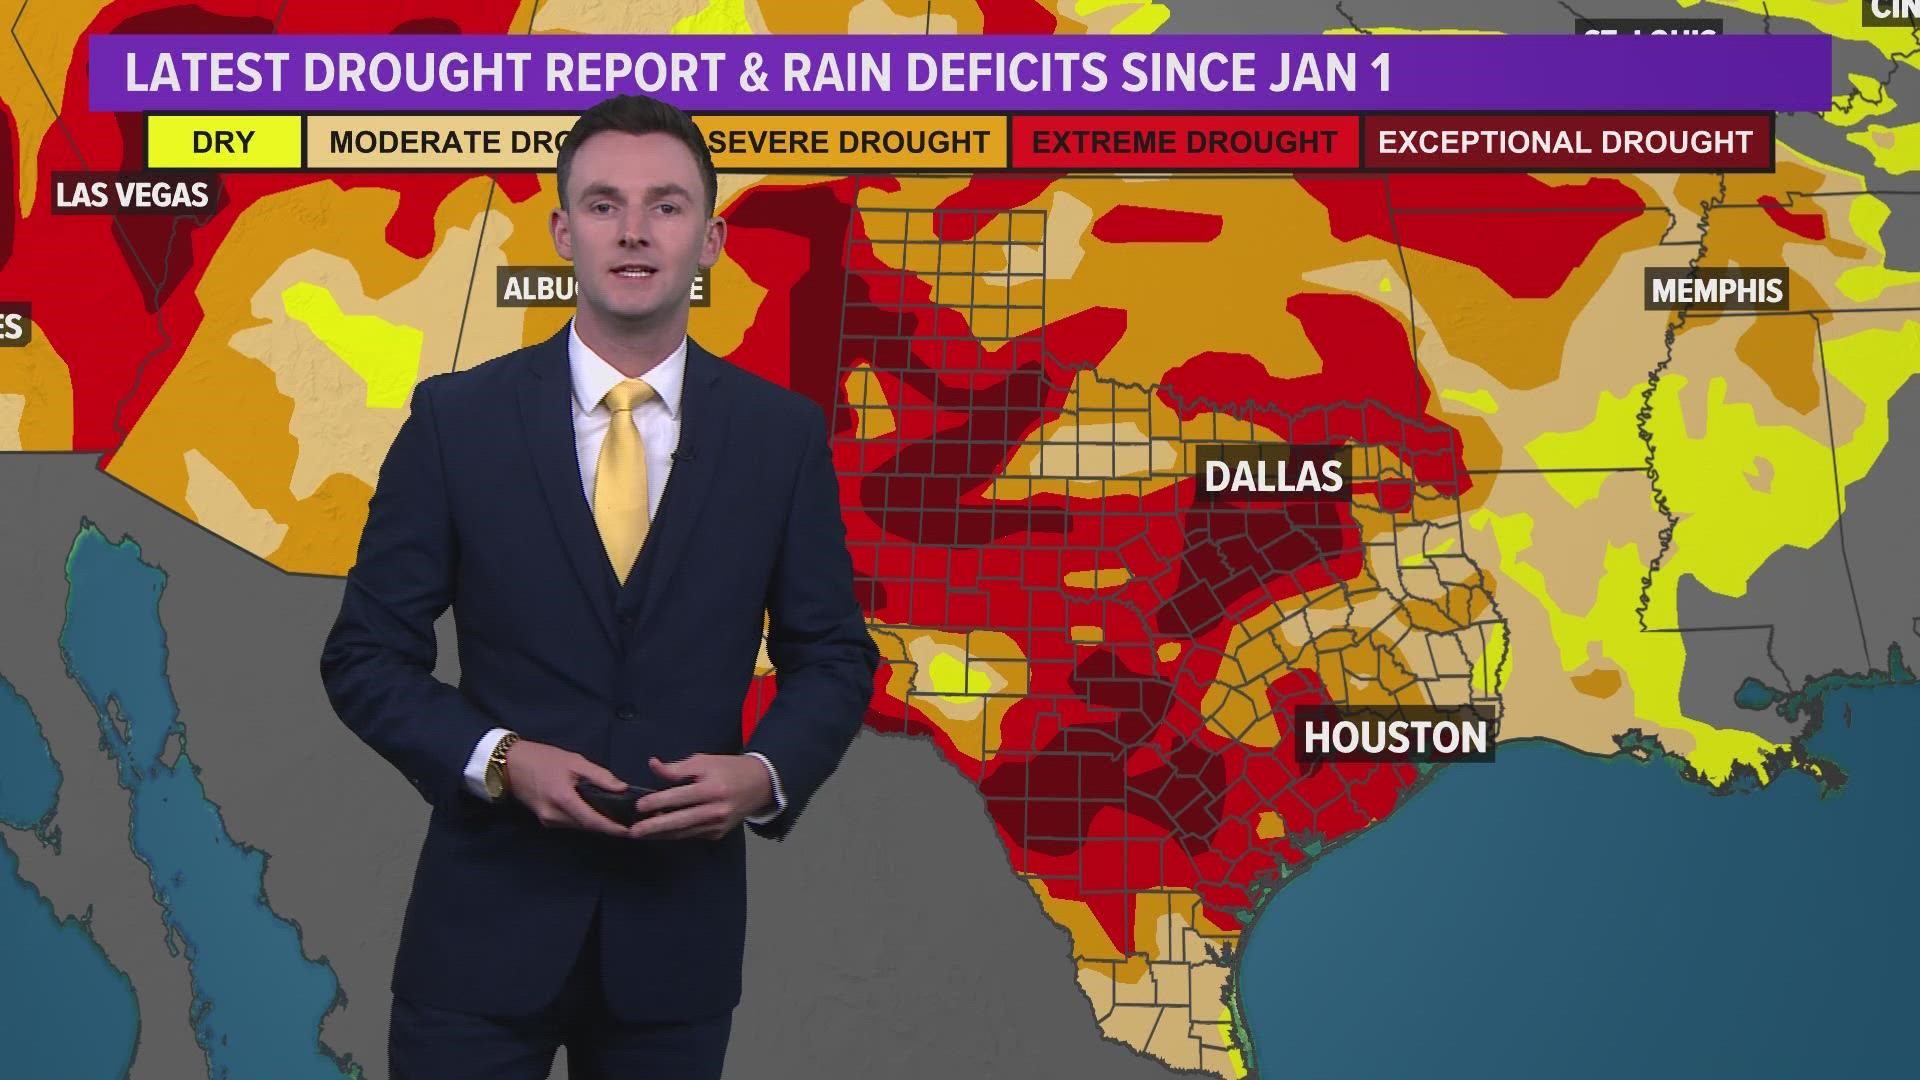 KHOU 11 Meteorologist Pat Cavlin is taking a deeper dive into the current drought situation in Southeast Texas and what it means for the Houston area.